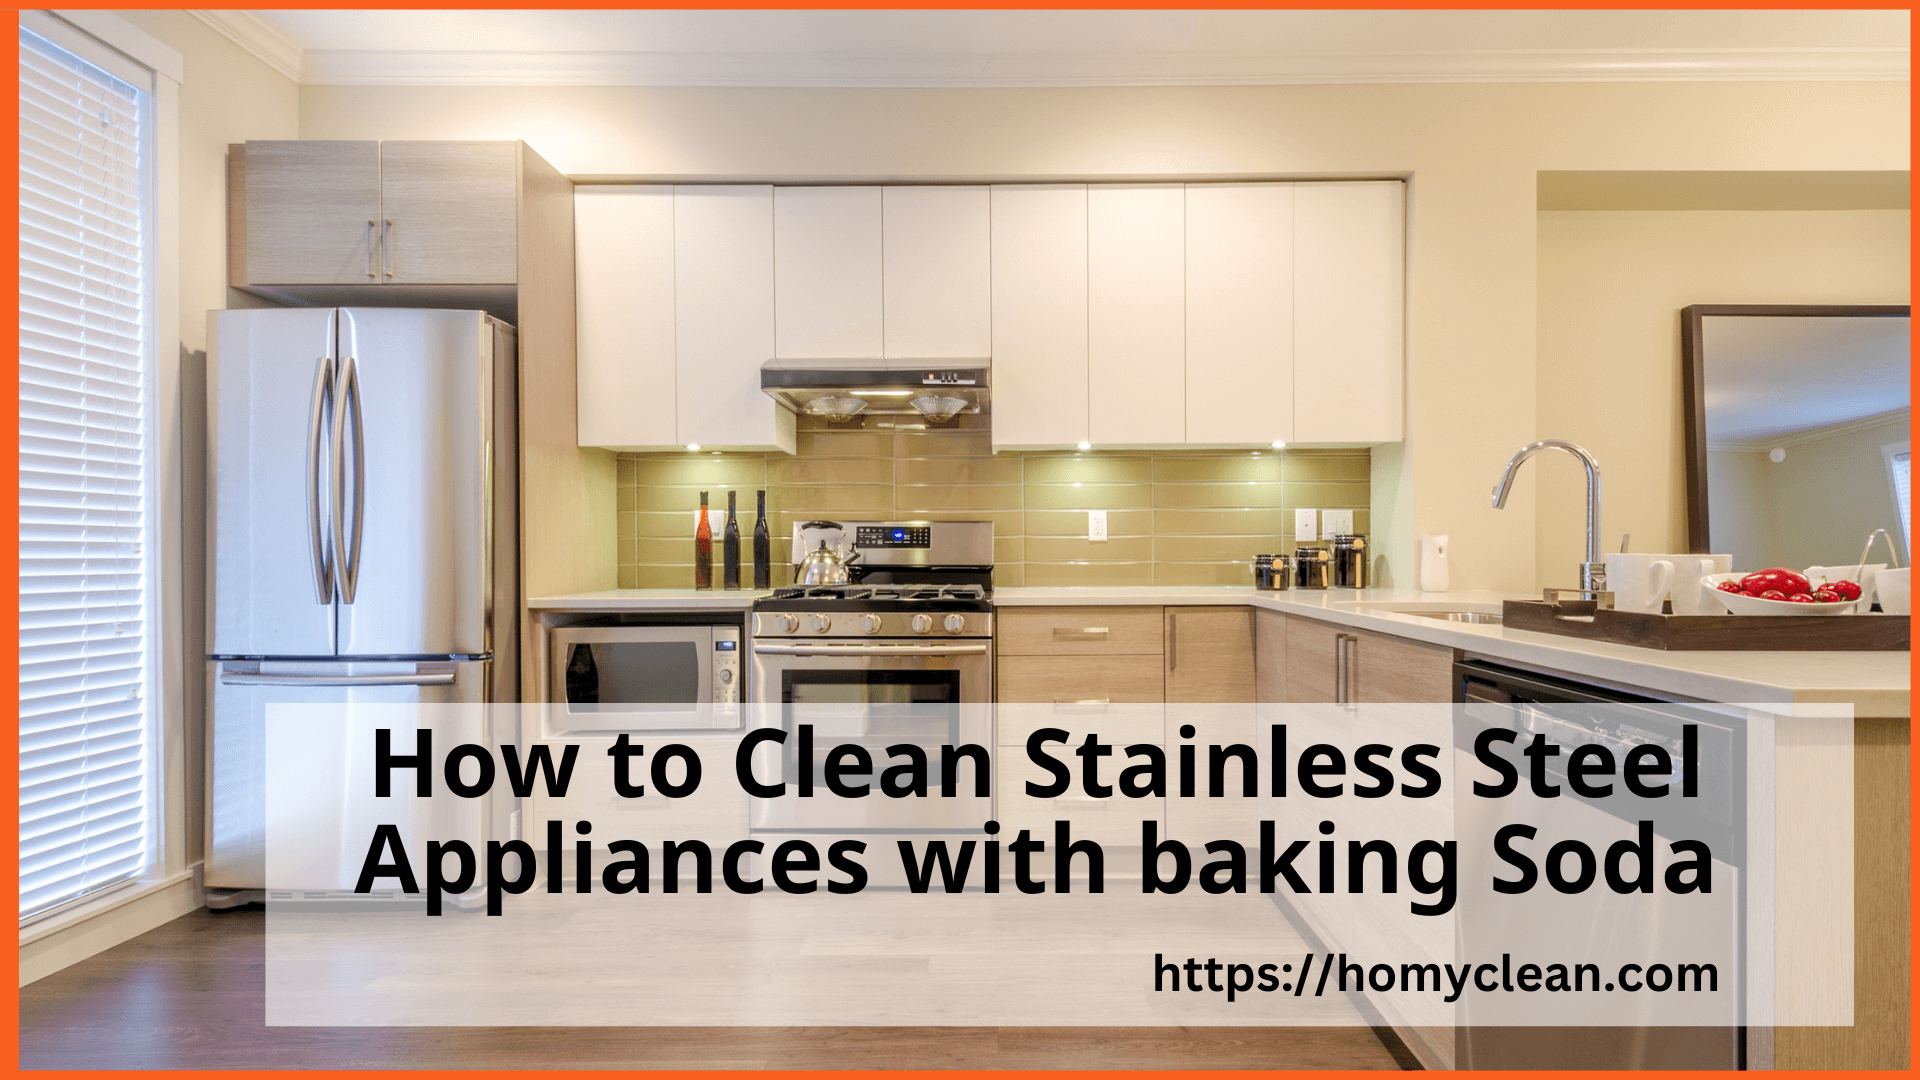 How to Clean Stainless Steel Appliances with Baking Soda